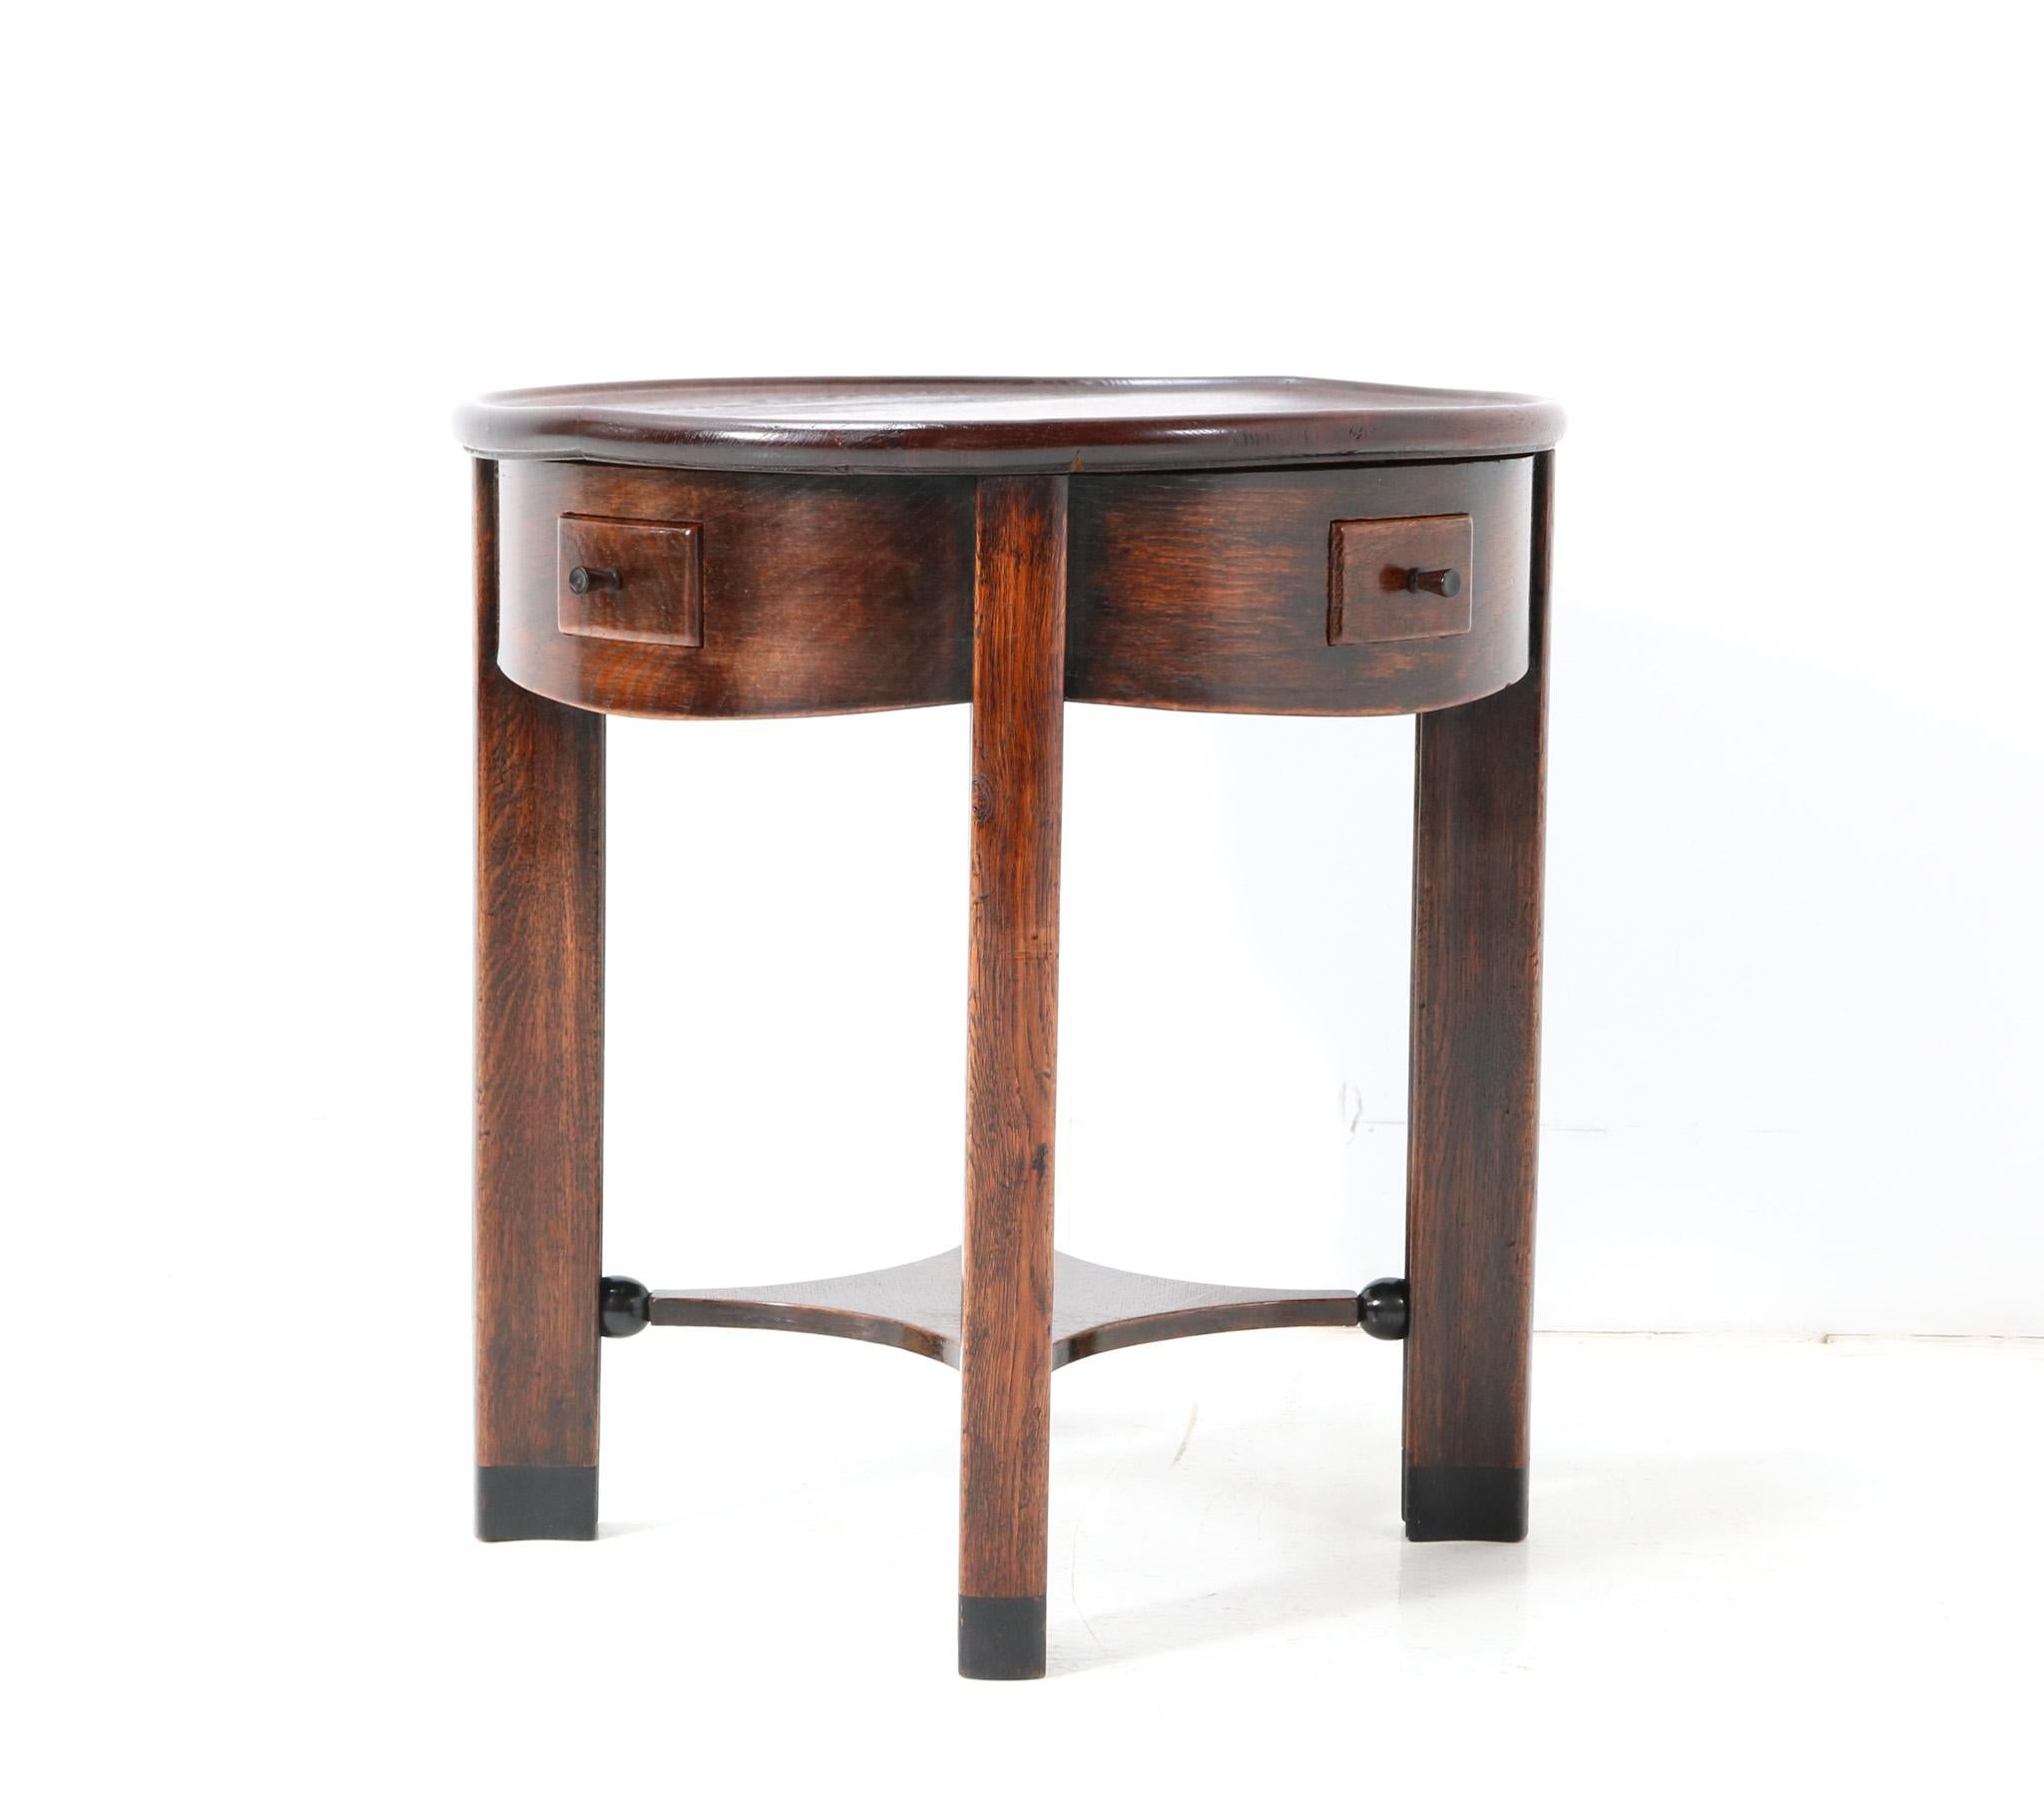 Magnificent and ultra rare Art Deco Amsterdamse School side table.
Design by Piet Kramer for N.V. v/h A.M. Randoe en Zonen Haarlem.
Solid oak frame with four original drawers with four original macassar ebony knobs.
The unusual design with the